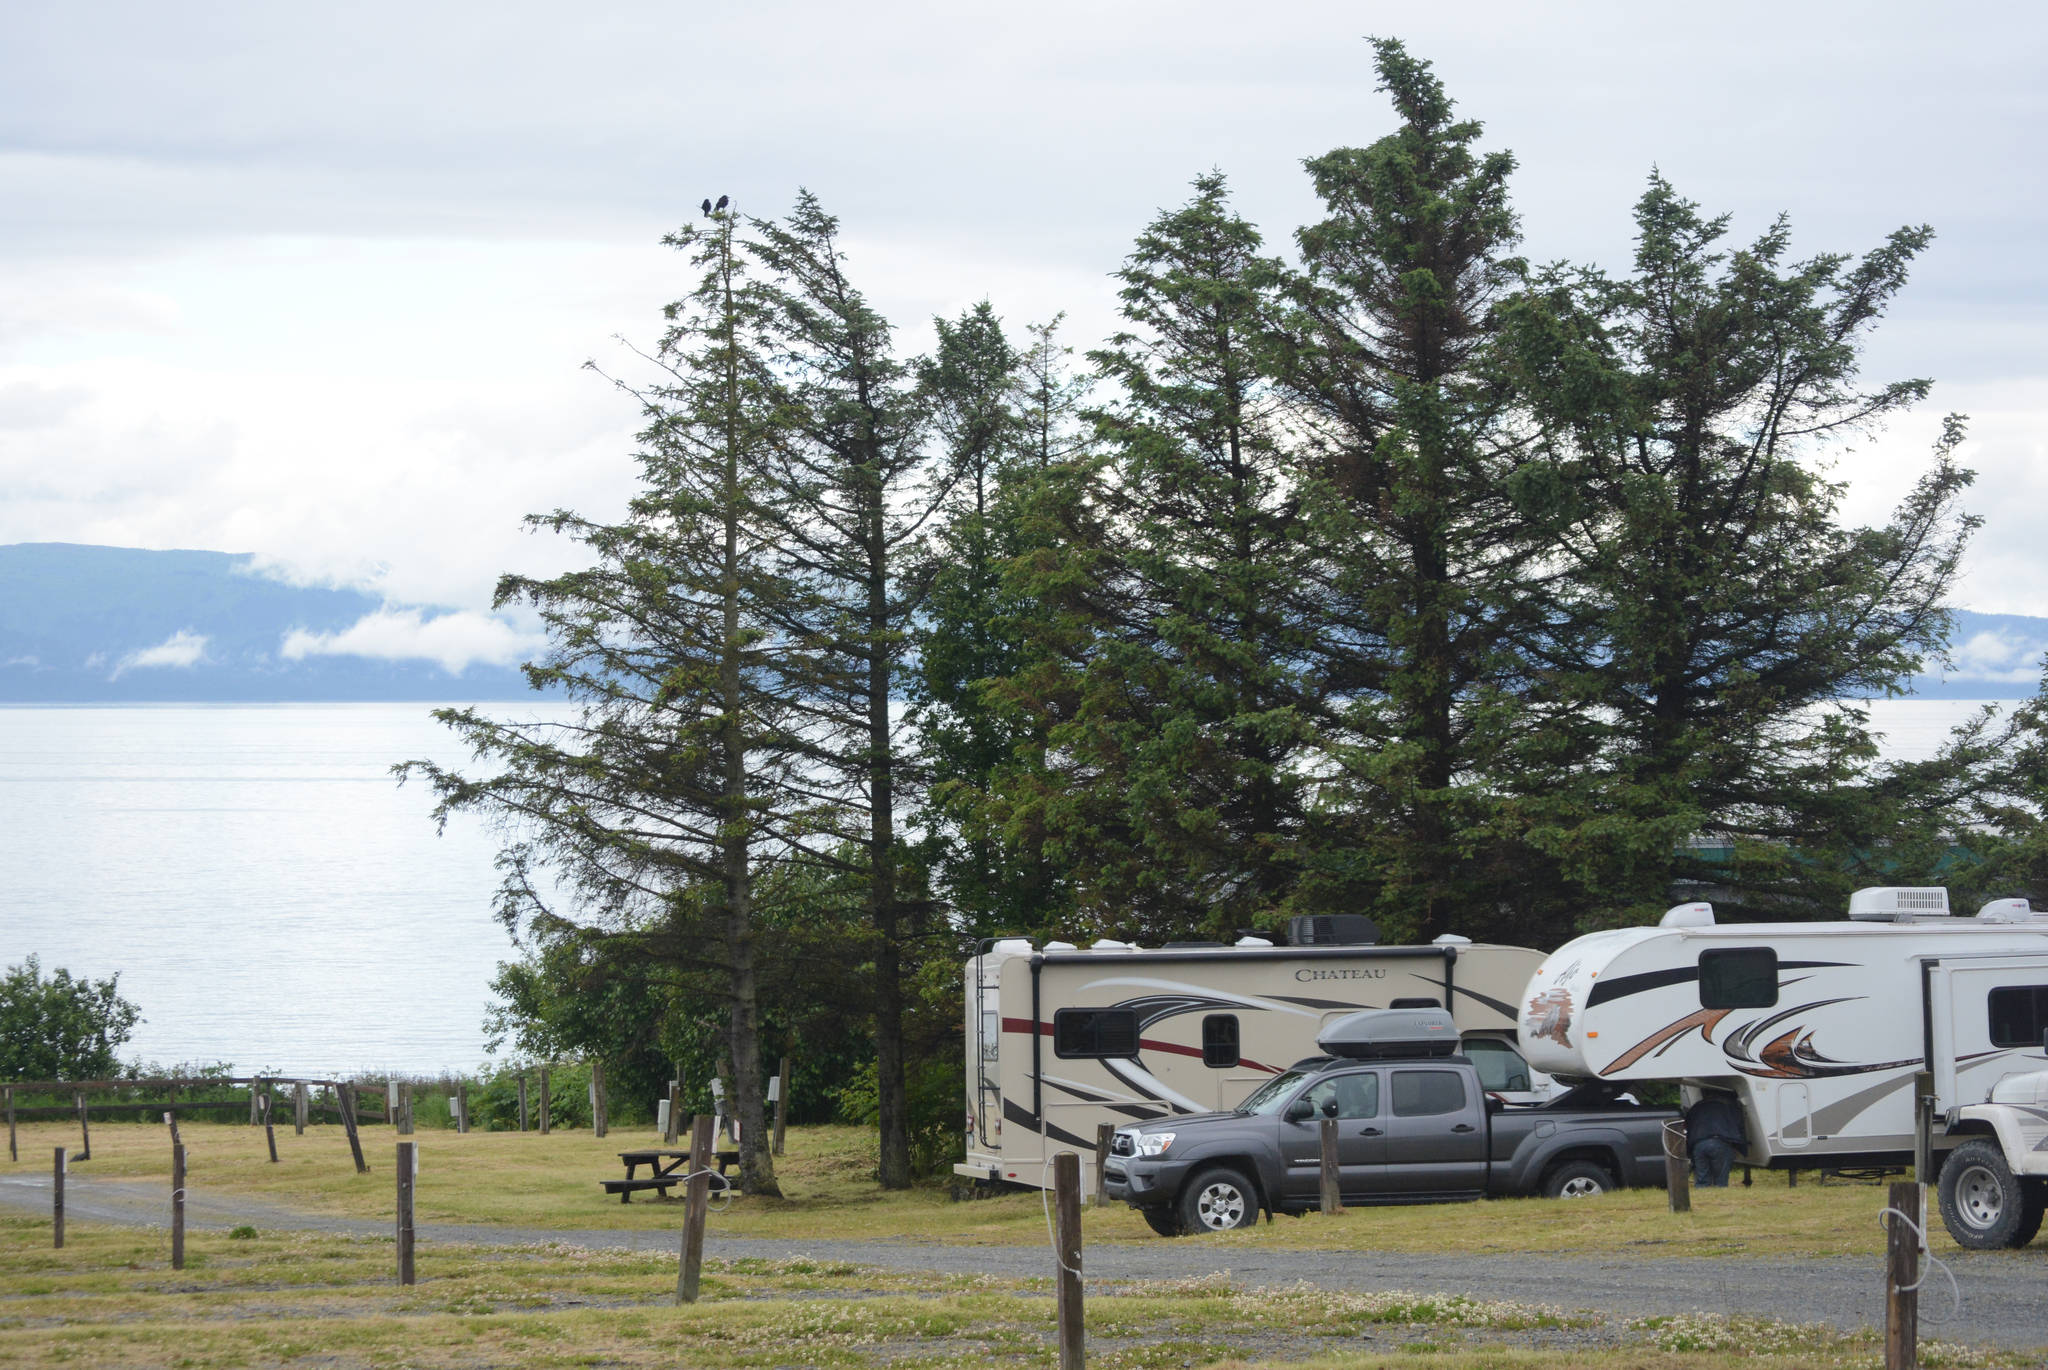 Motorhomes and trailers are parked on June 29, 2018, at the Ocean Shores RV Park on the Sterling Highway, Homer, Alaska. The longtime campground formerly known as Ocean View RV Park reopened last month under its new owner, Michael Warburton, who also owns Ocean Shores Motel next door. (Photo by Michael Armstrong/Homer News)